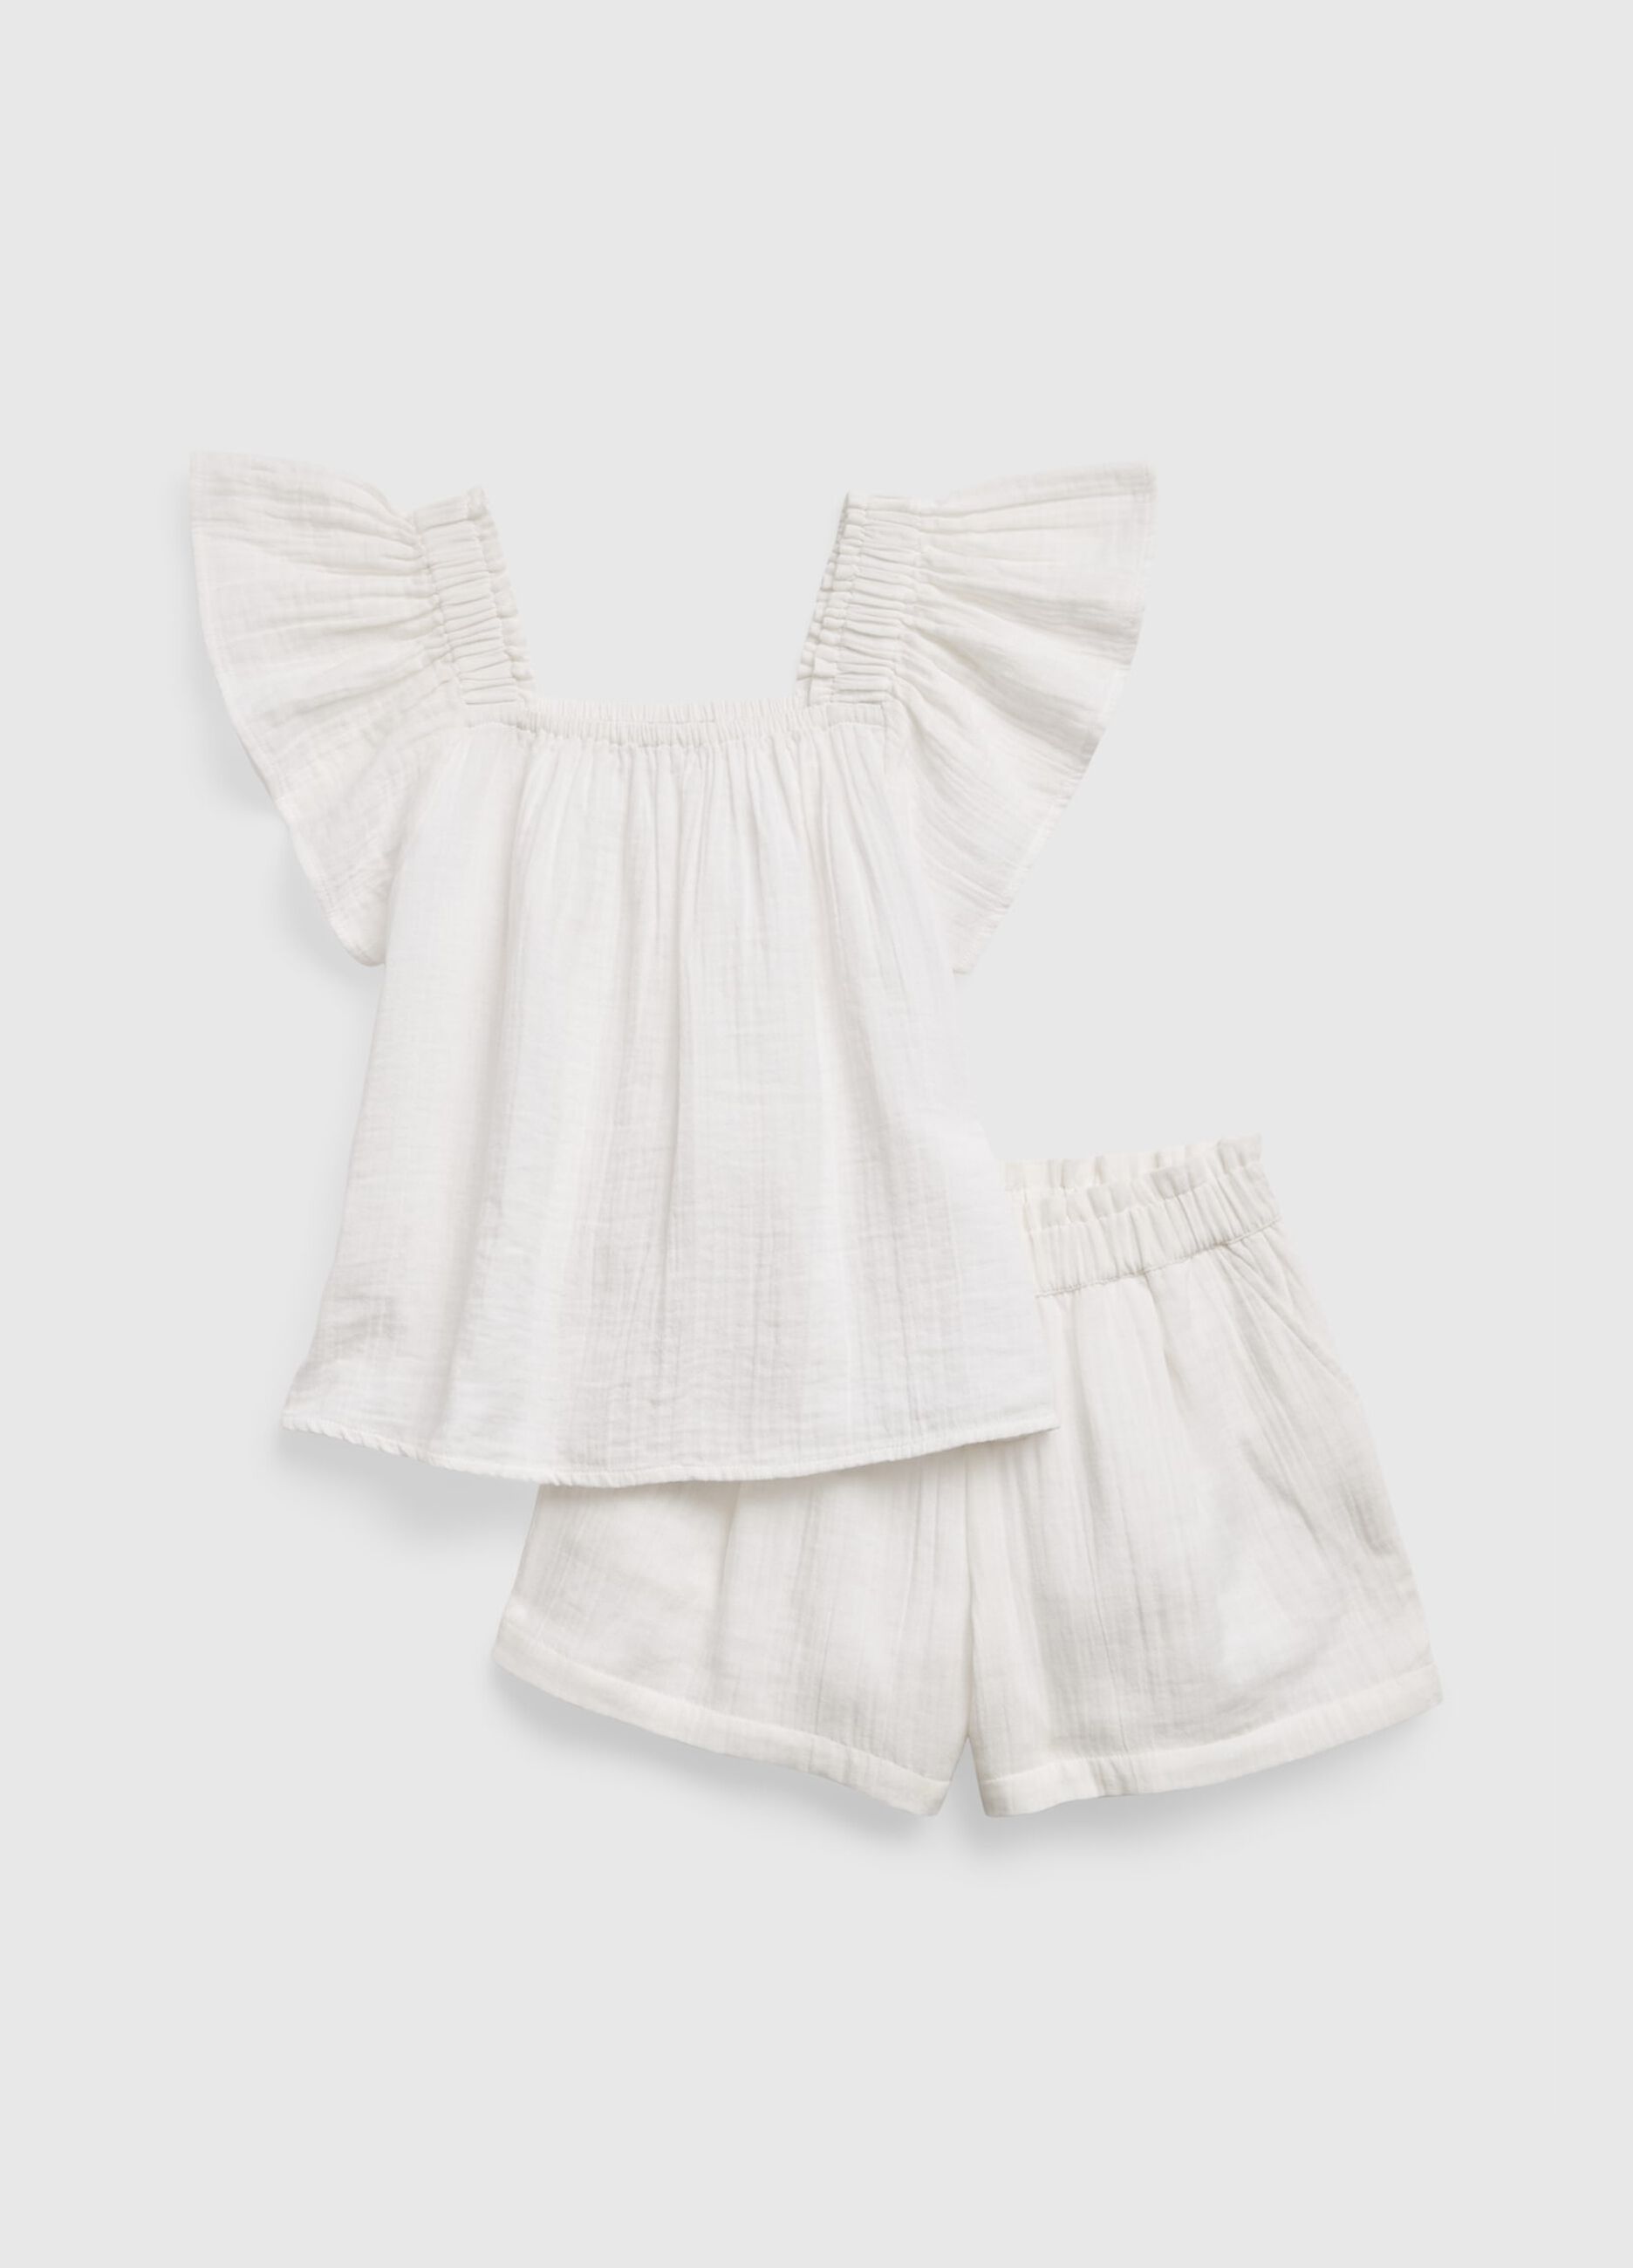 Top and shorts set in cotton gauze